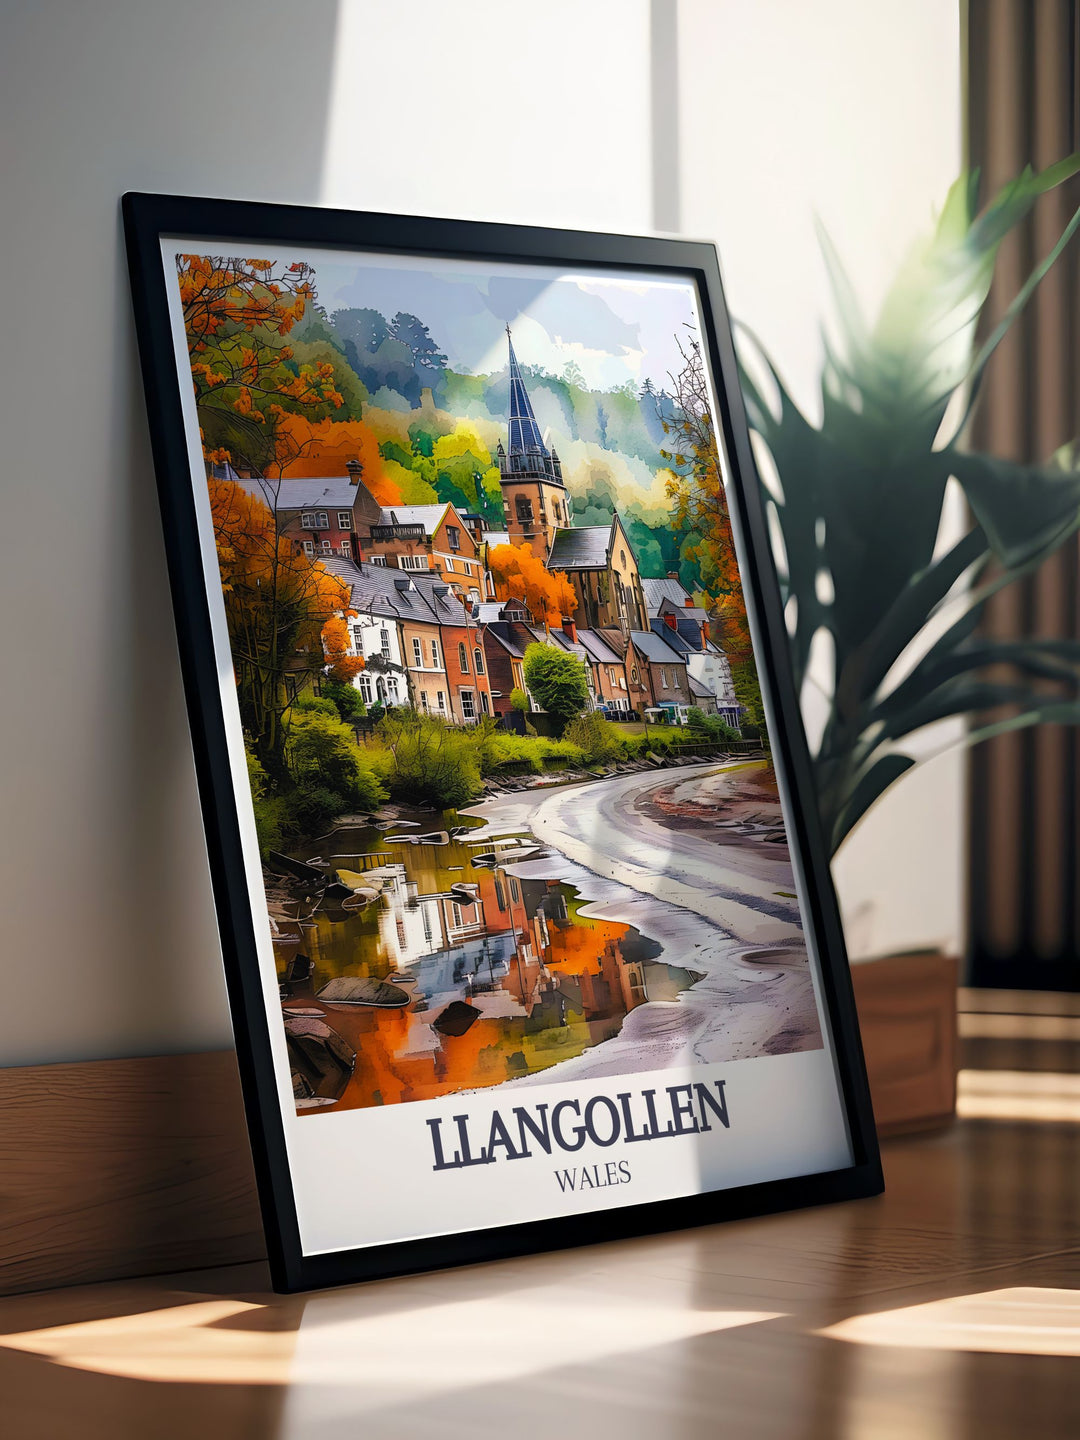 Bring home the beauty of Llangollen with this print featuring River Dee, Llangollen Canal, and Llangollen Methodist Church, ideal for Wales wall art.